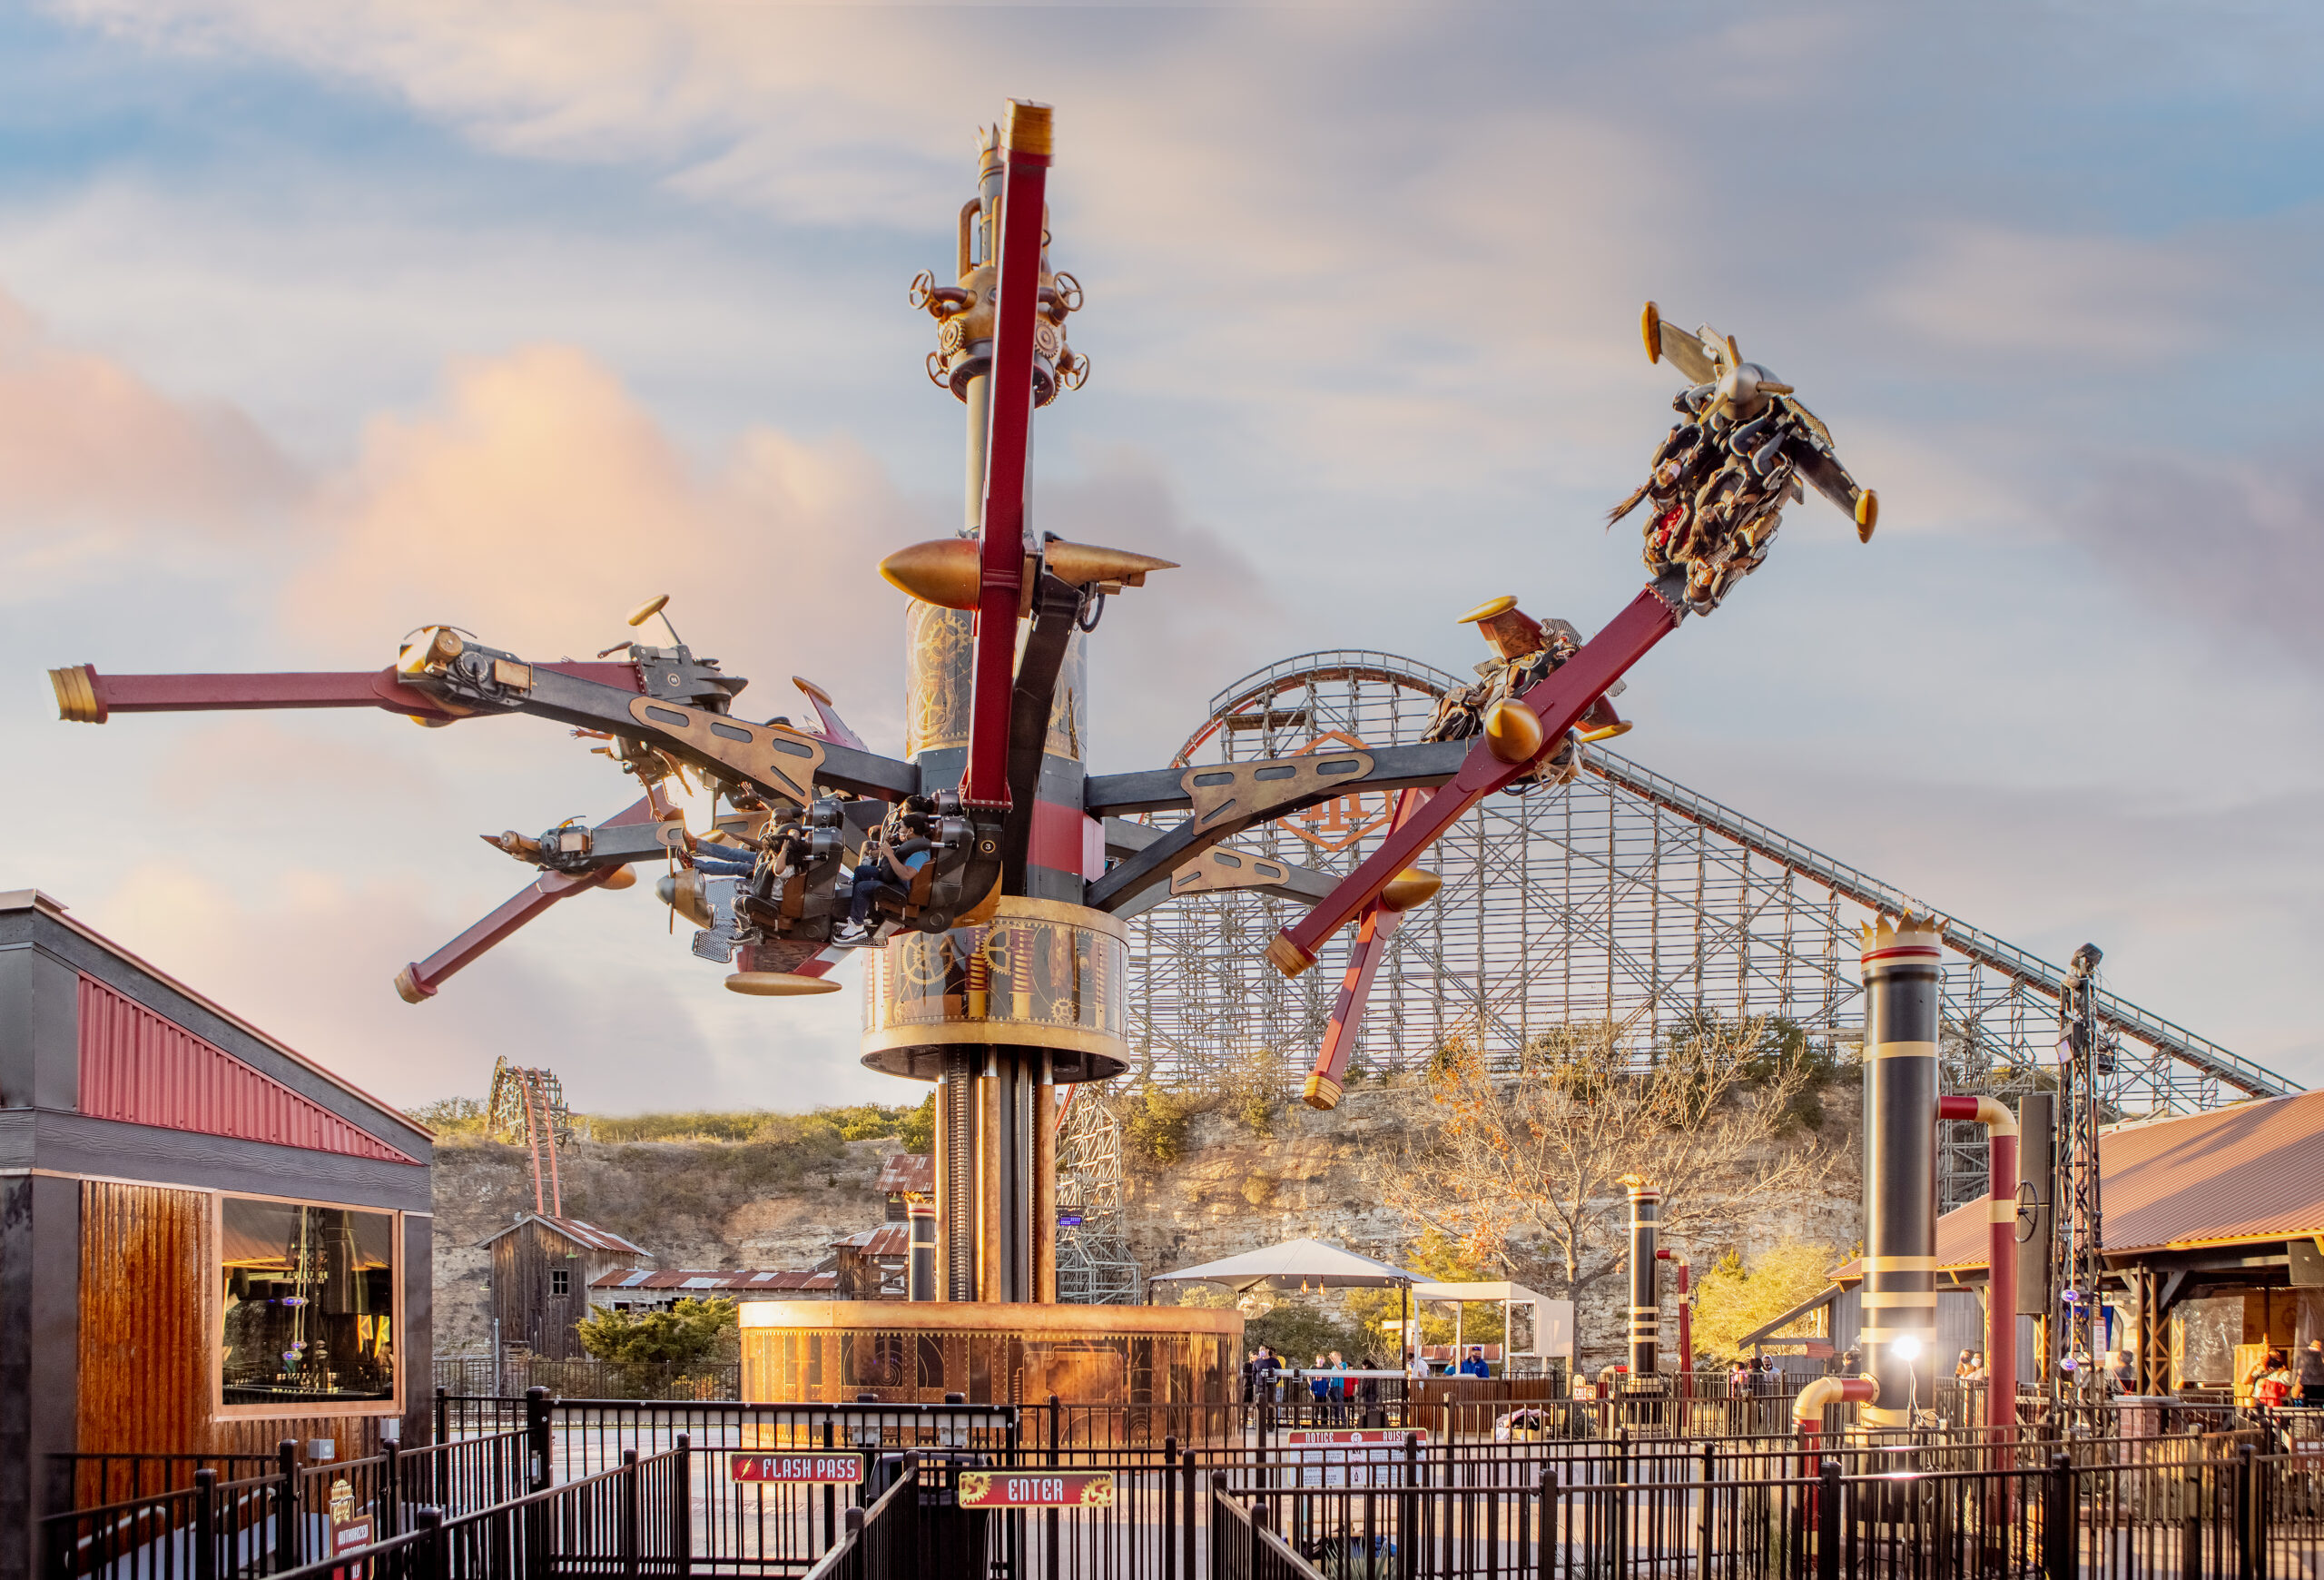 Six Flags Fiesta Texas opens the first new ride of 2021 season